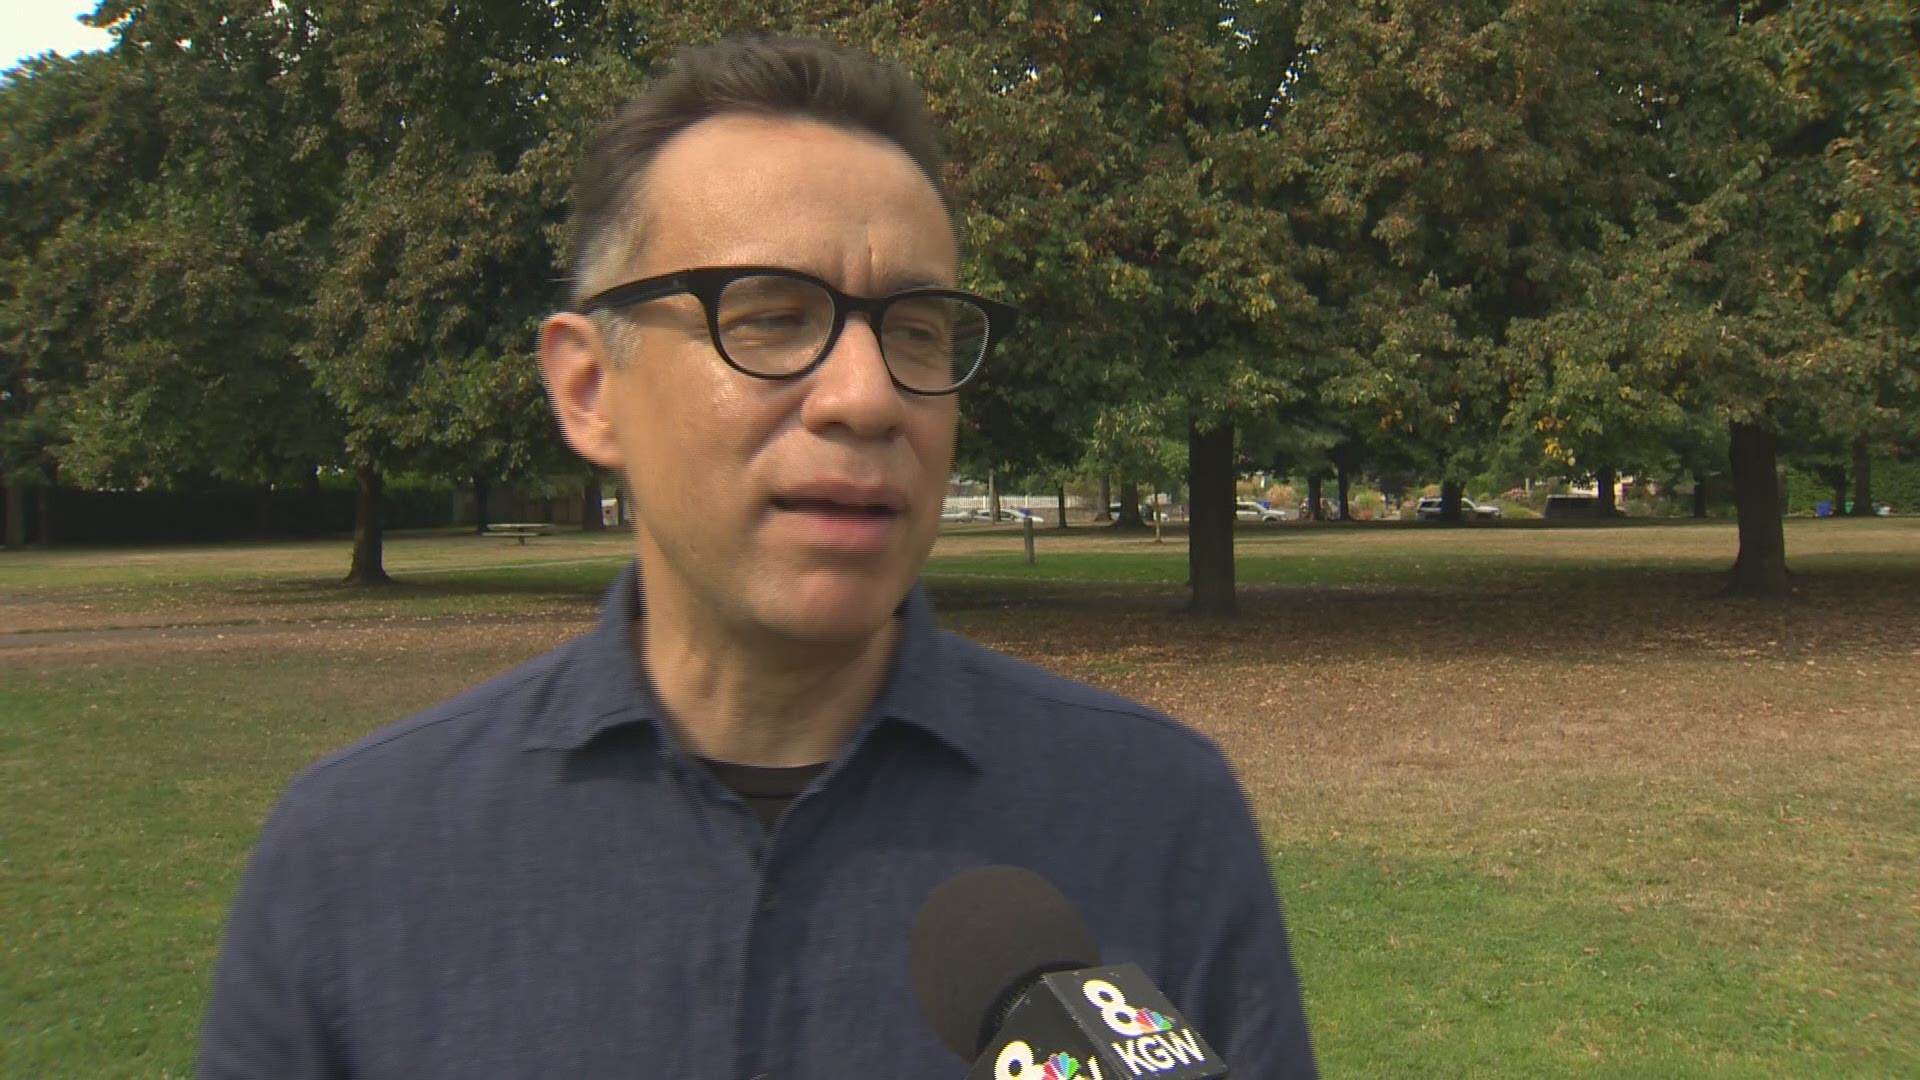 As 'Portlandia' finishes shooting its 8th and final season, Fred Armisen and Carrie Brownstein look back on what they loved about the show and about the Rose City.  The series finale airs January 18 on IFC.